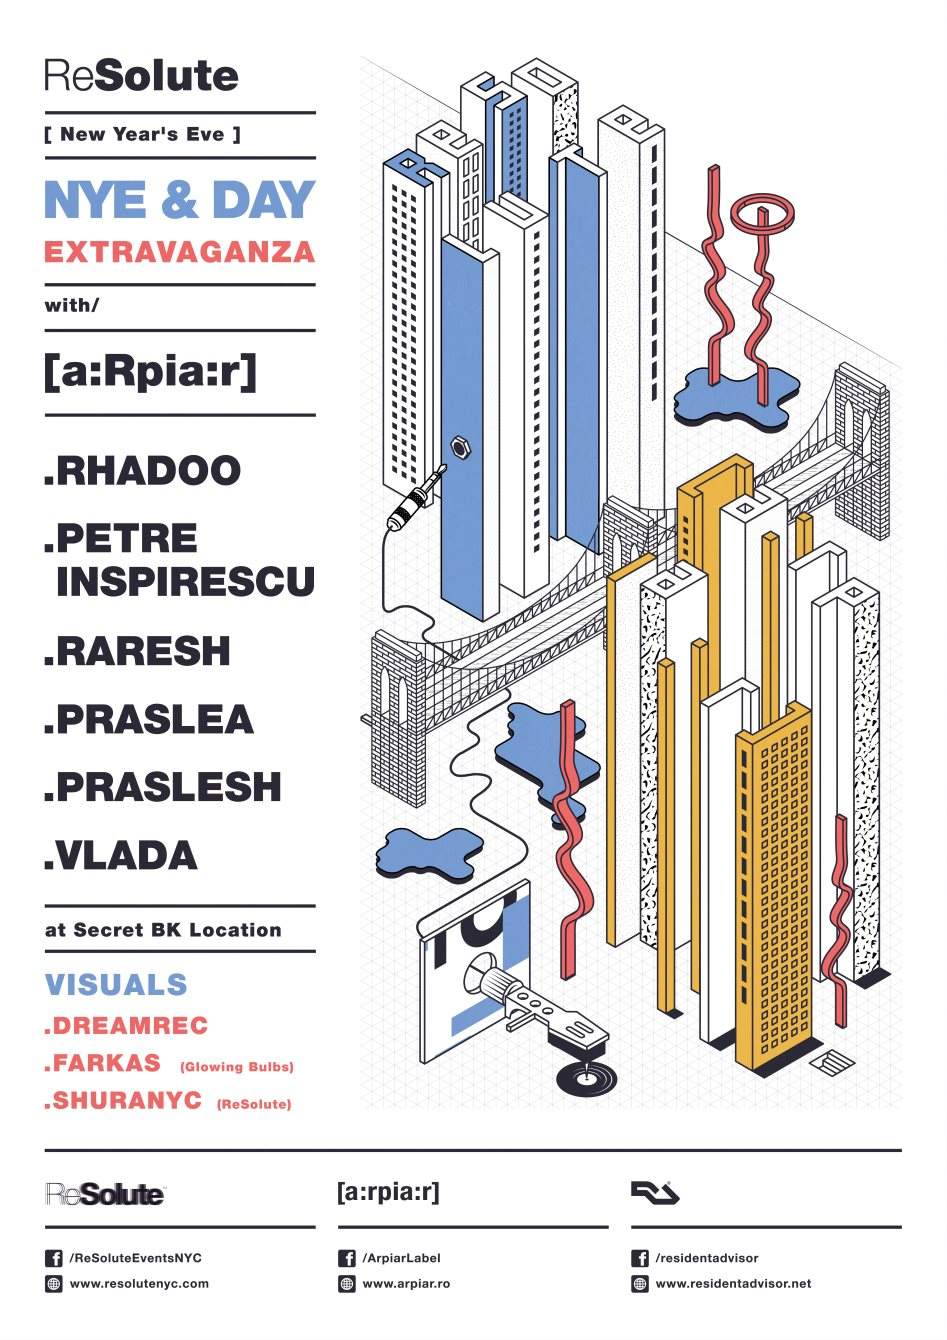 Resolute New Year's Eve and Day Extravaganza with [a:Rpia:r] - Página trasera